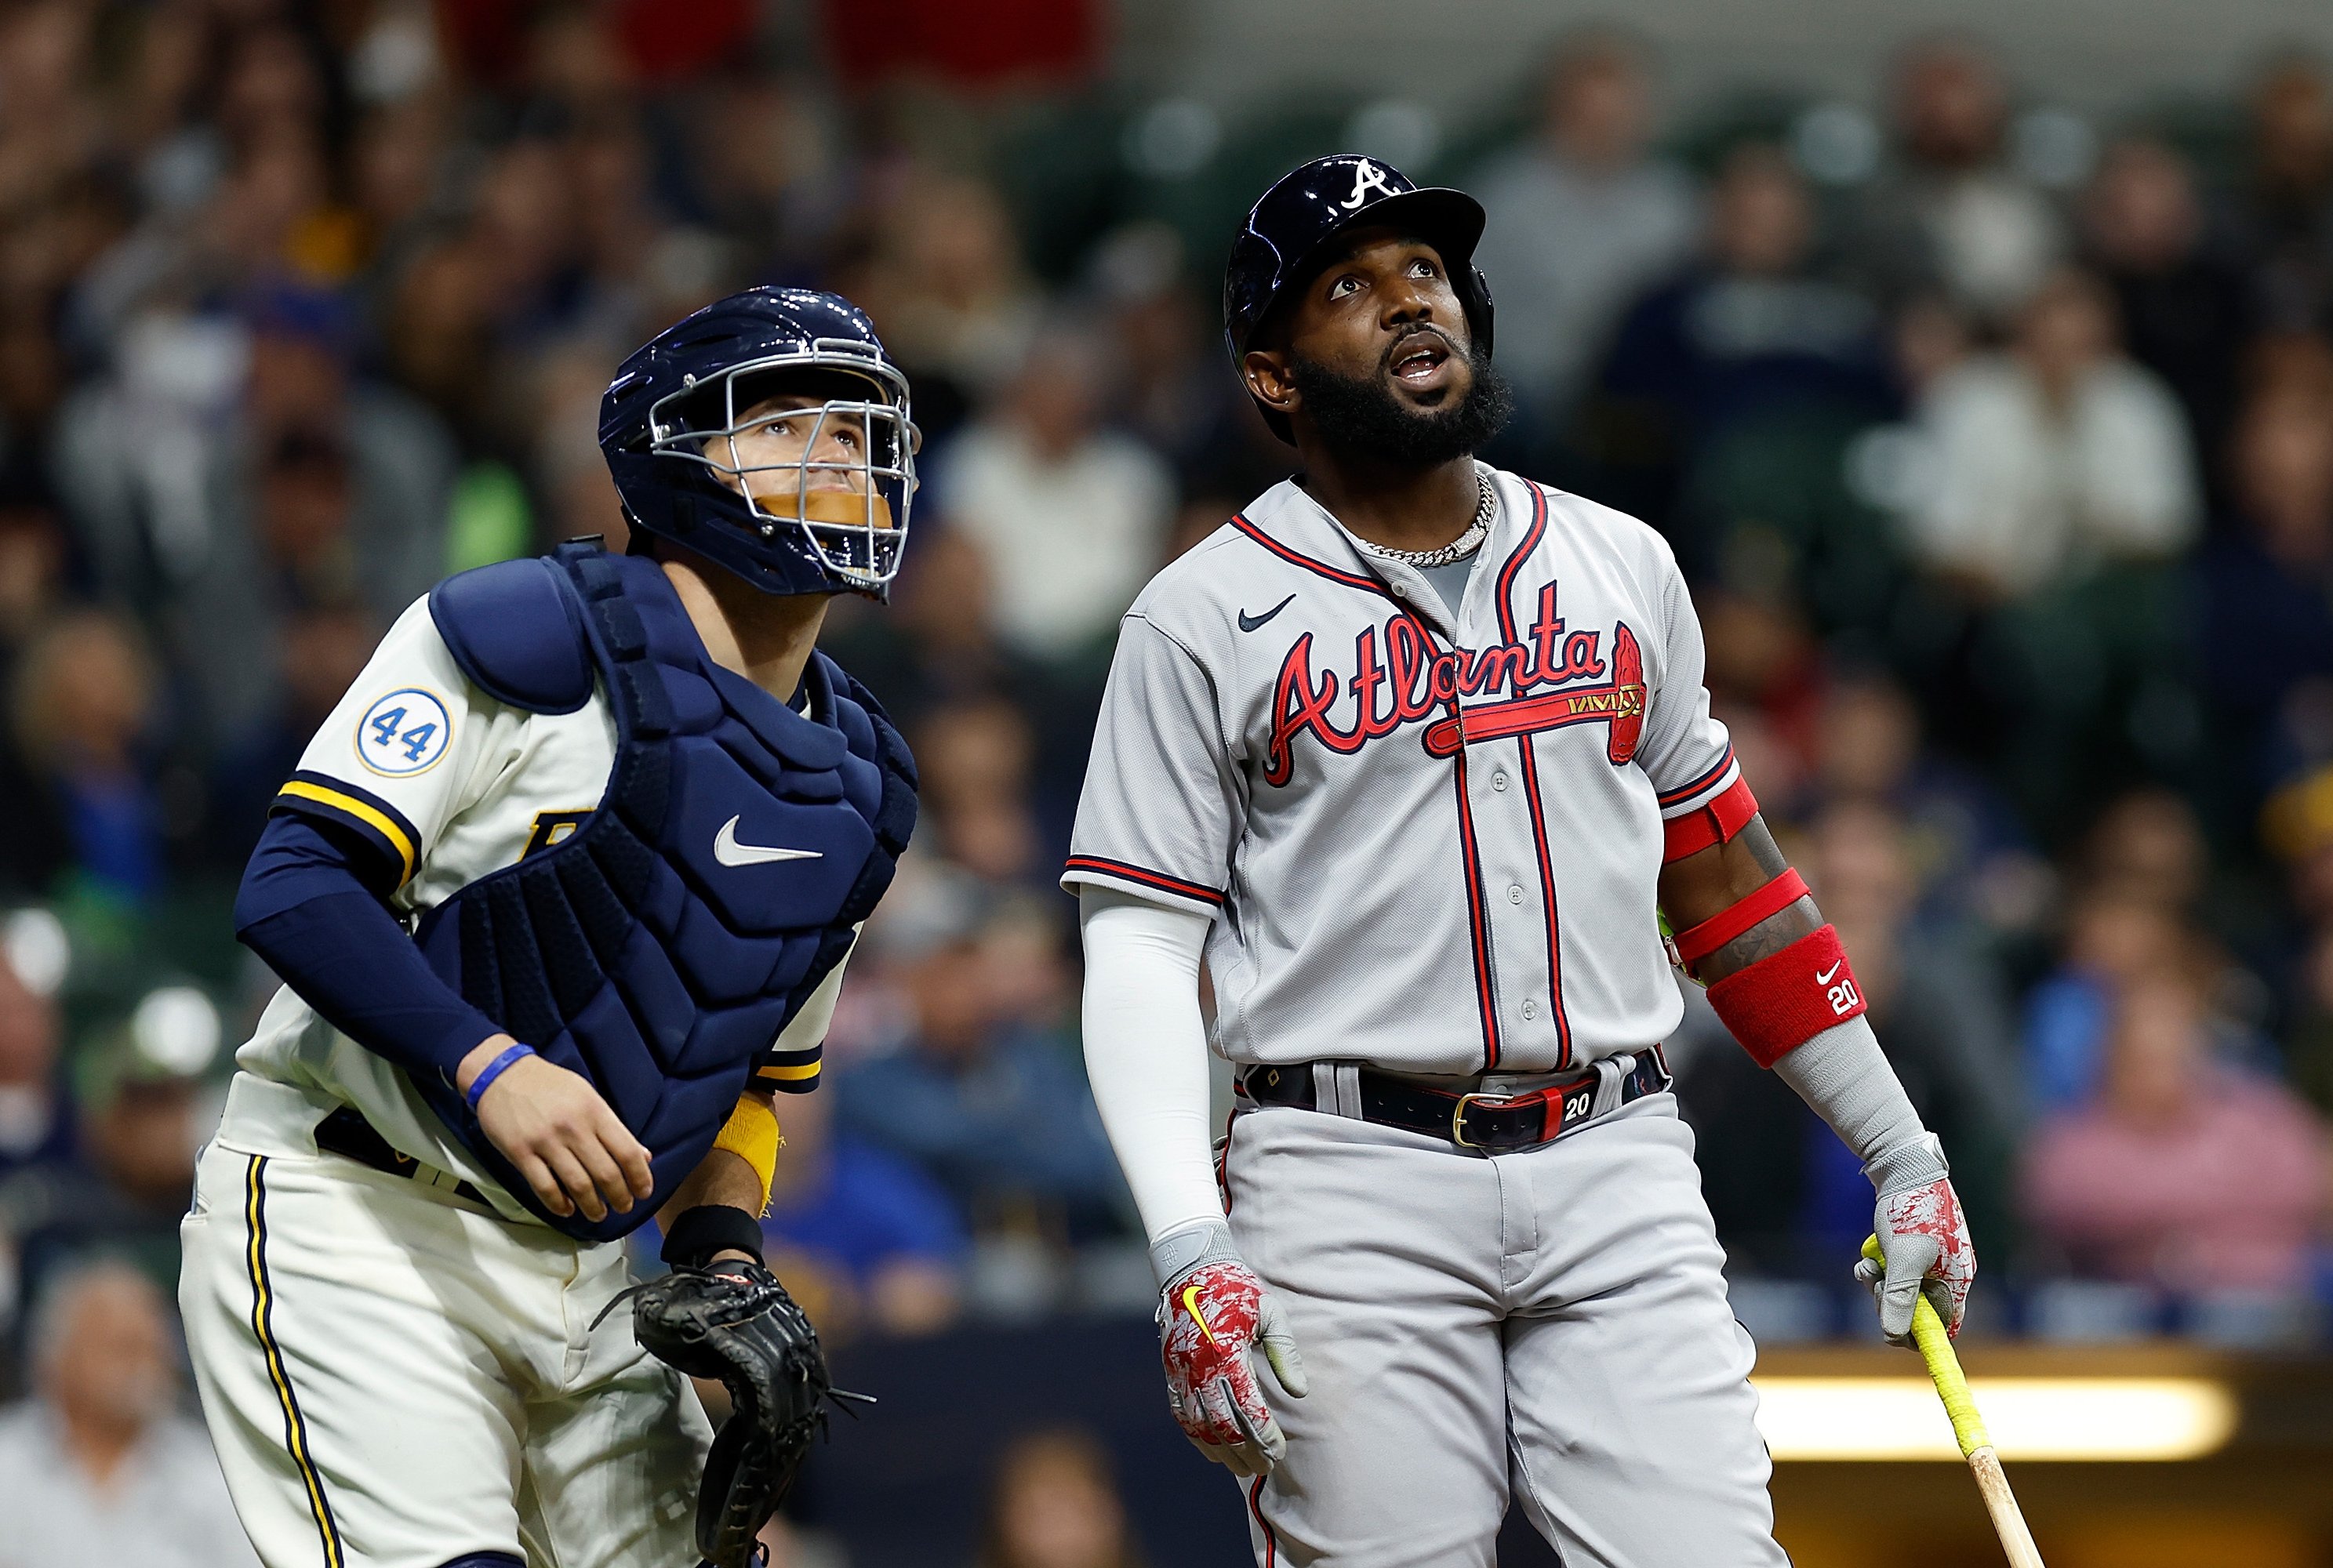 All-Star Riley agrees to $212M, 10-year deal with Braves